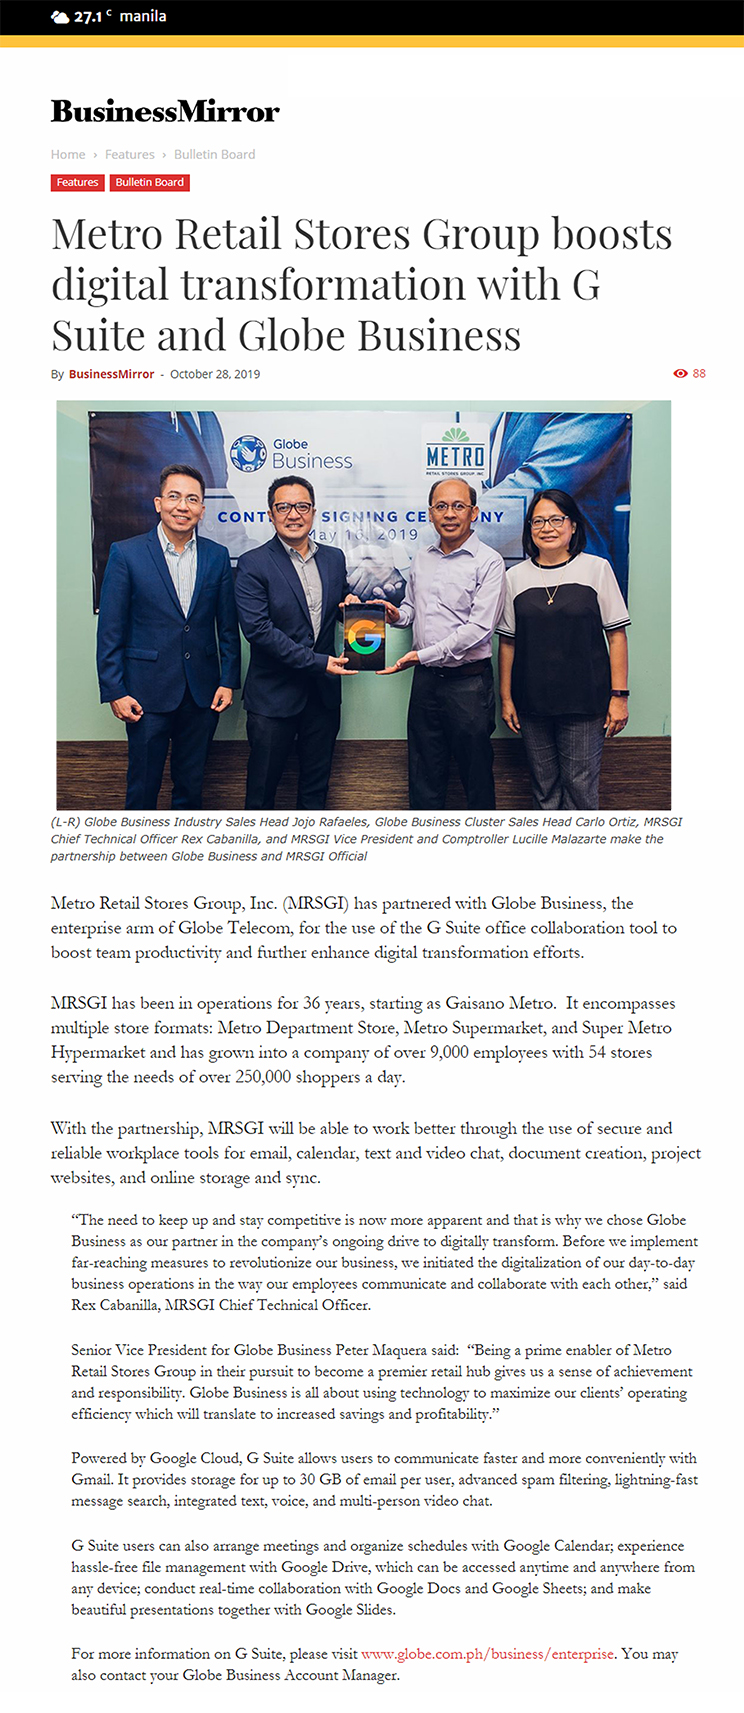 October 28 2019 Metro Retail Stores Group boosts digital transformation with G Suite and Globe Business Mirror www.businessmirror.com.ph